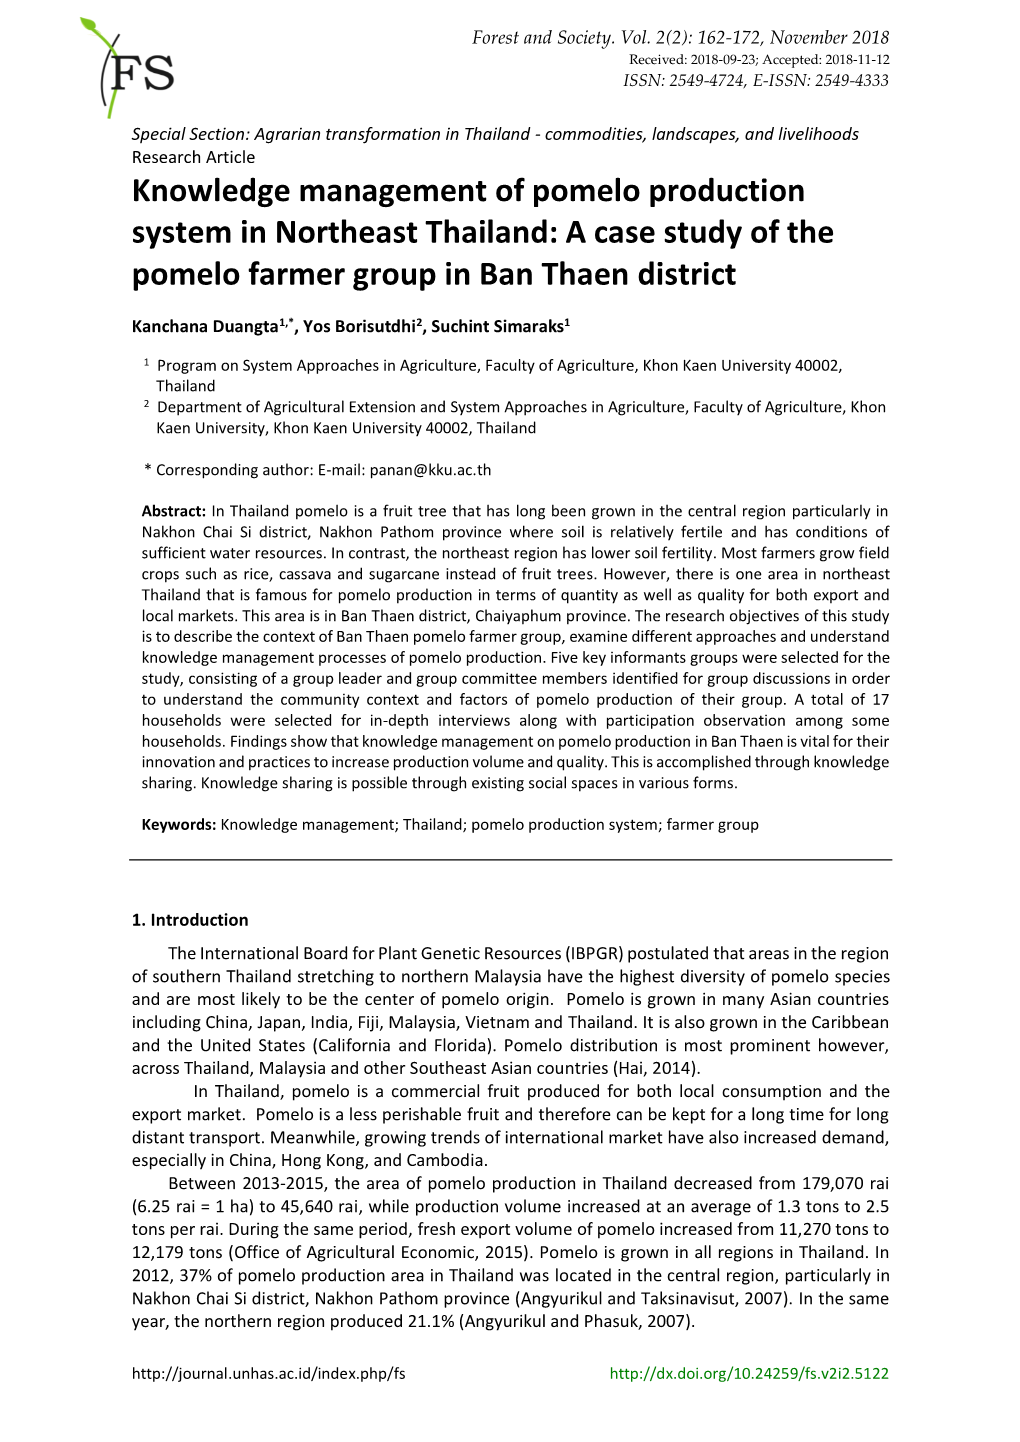 Knowledge Management of Pomelo Production System in Northeast Thailand: a Case Study of the Pomelo Farmer Group in Ban Thaen District